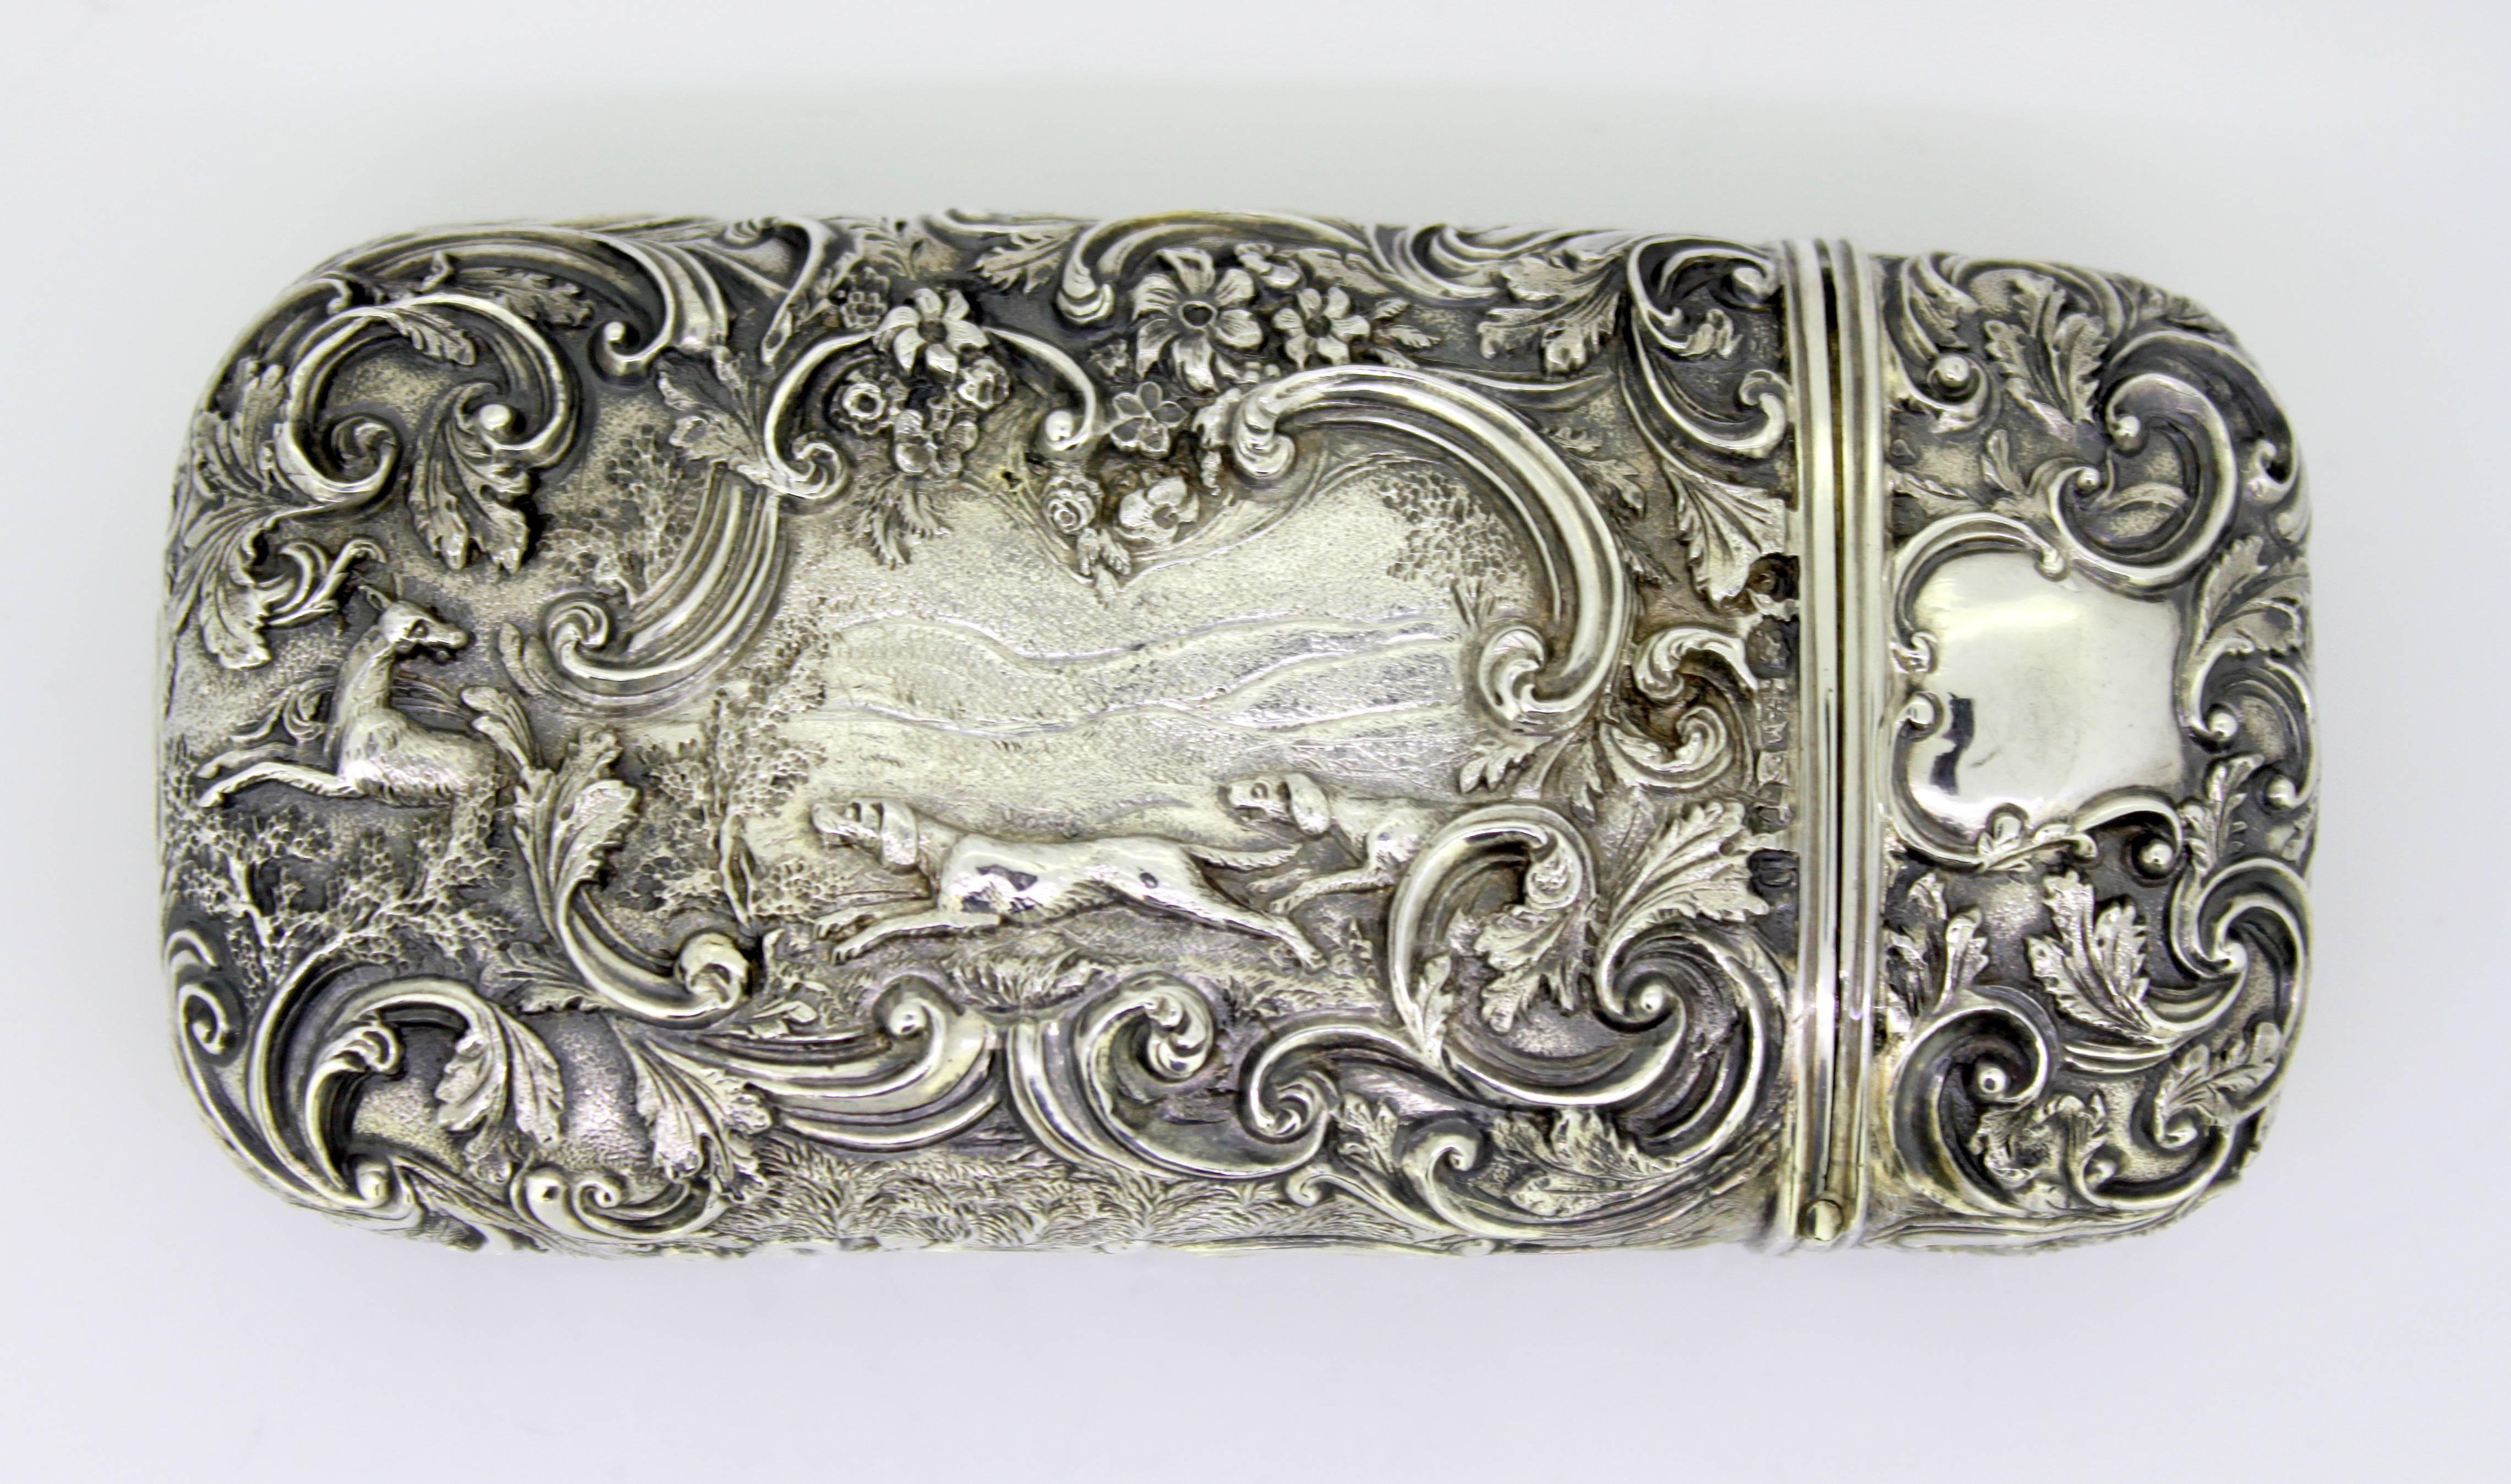 Late 19th Century Elaborately Engraved Victorian Silver Case with Hunting Scene, Roberts & Belk